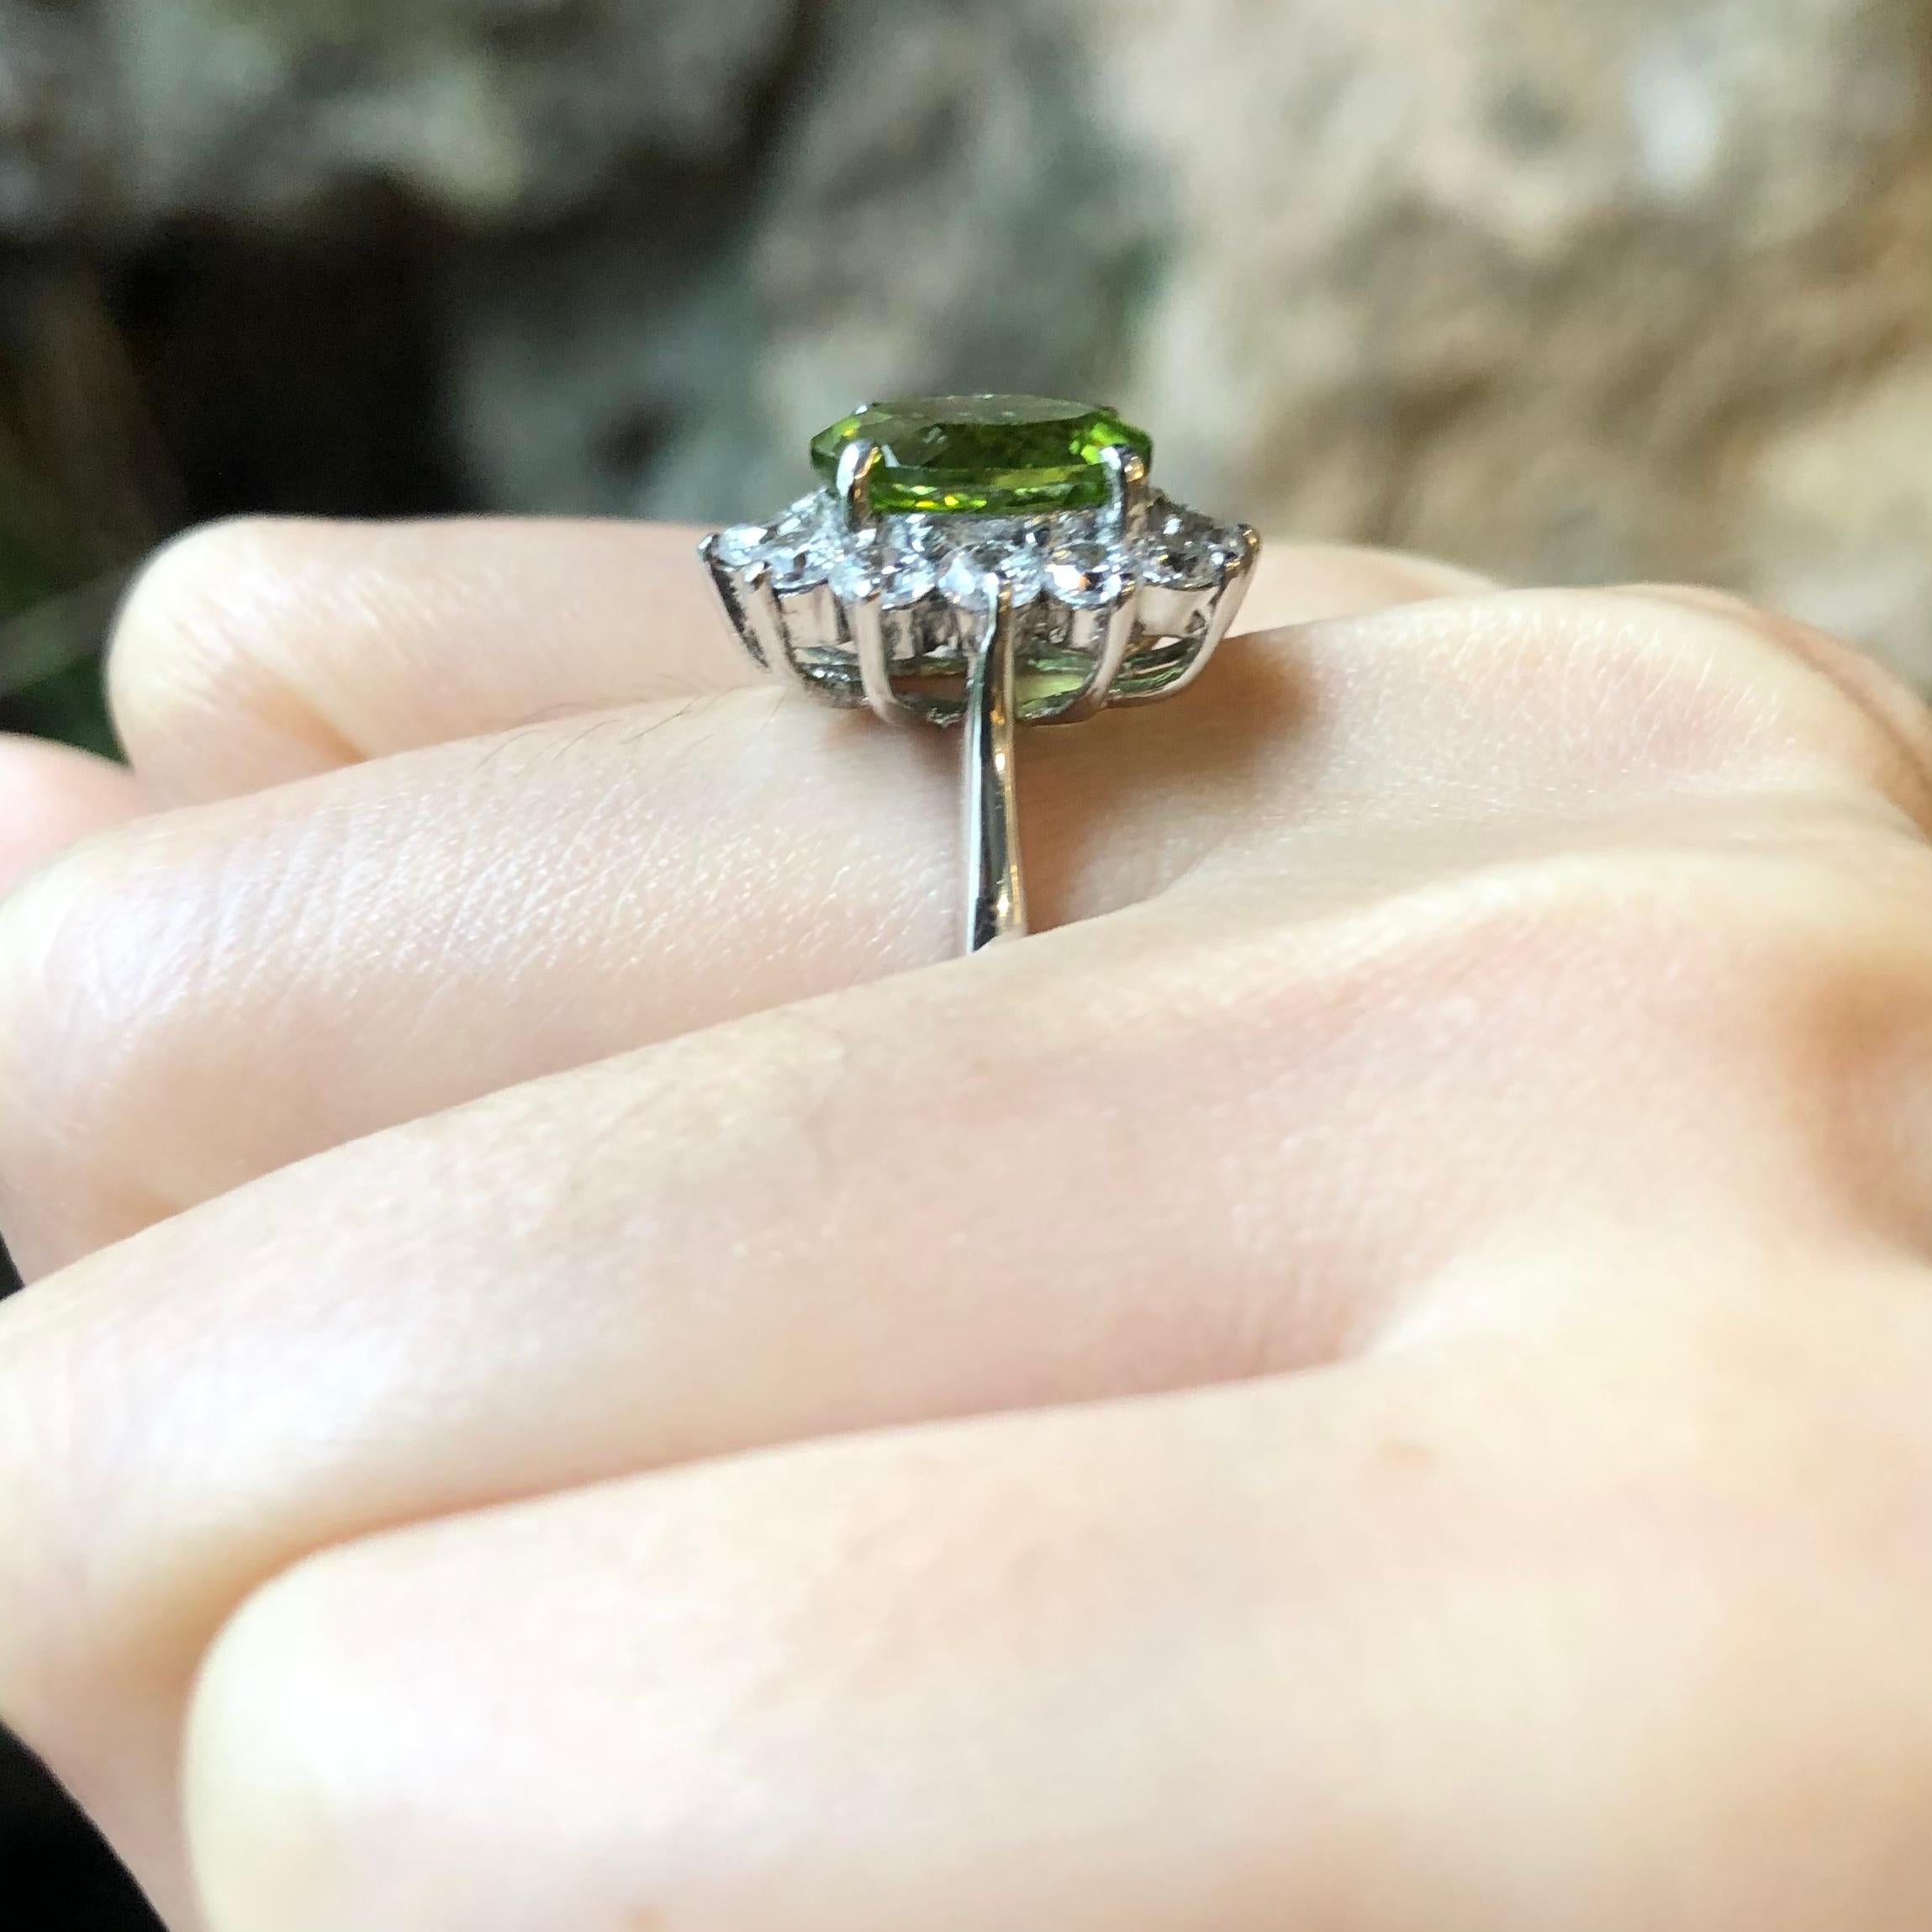 Peridot with Cubic Zirconia Ring set in Silver Settings

Width:  1.3 cm 
Length: 1.8 cm
Ring Size: 56
Total Weight: 6.09 grams

*Please note that the silver setting is plated with rhodium to promote shine and help prevent oxidation.  However, with